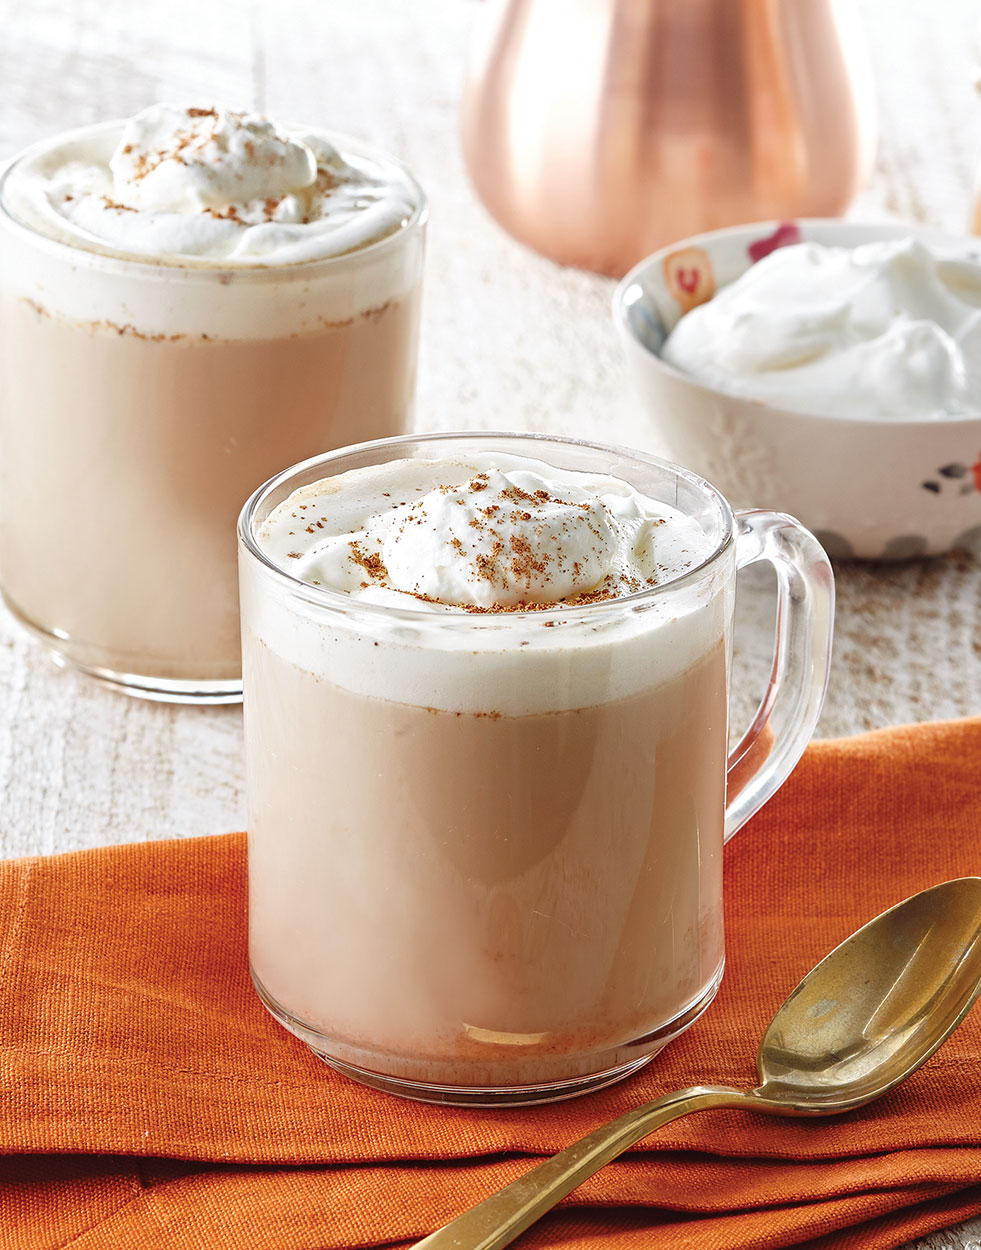 Pumpkin & Spice Lattes with whipped cream